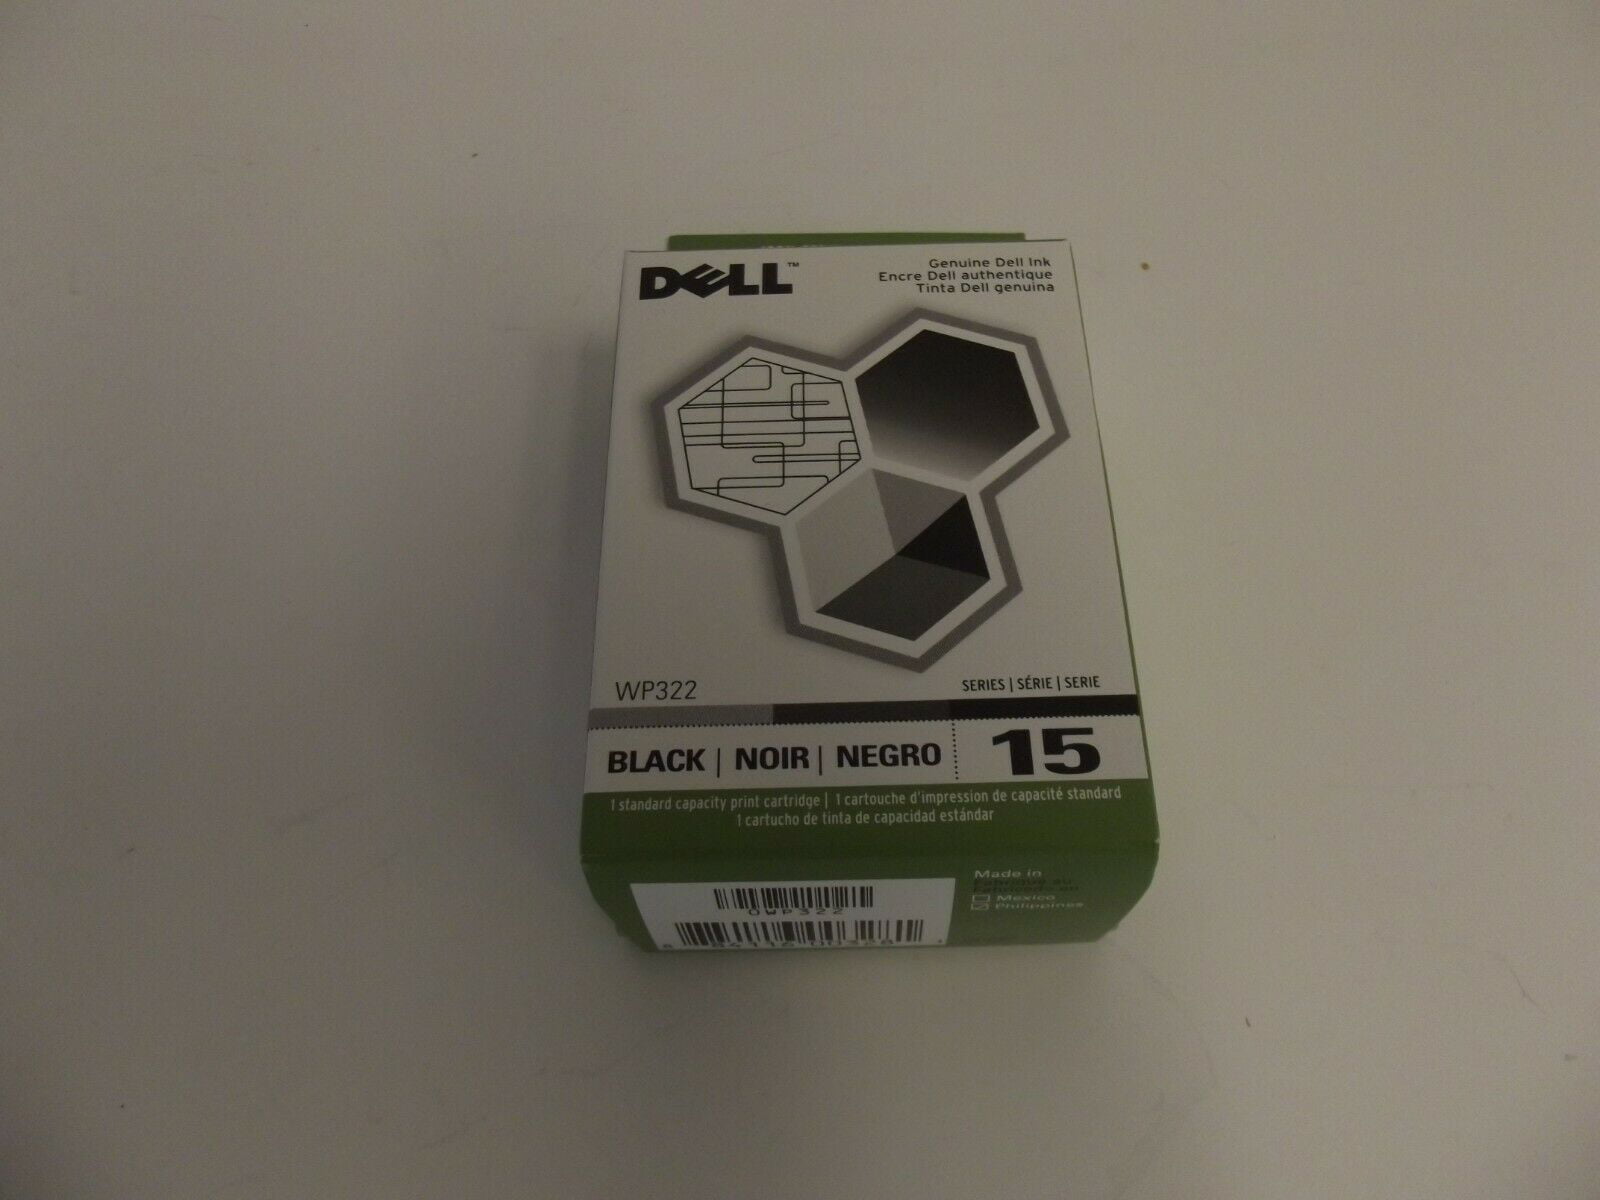 Genuine Dell Series 15 Black Wp322 Ink Cartridge V105 AIO for sale online 